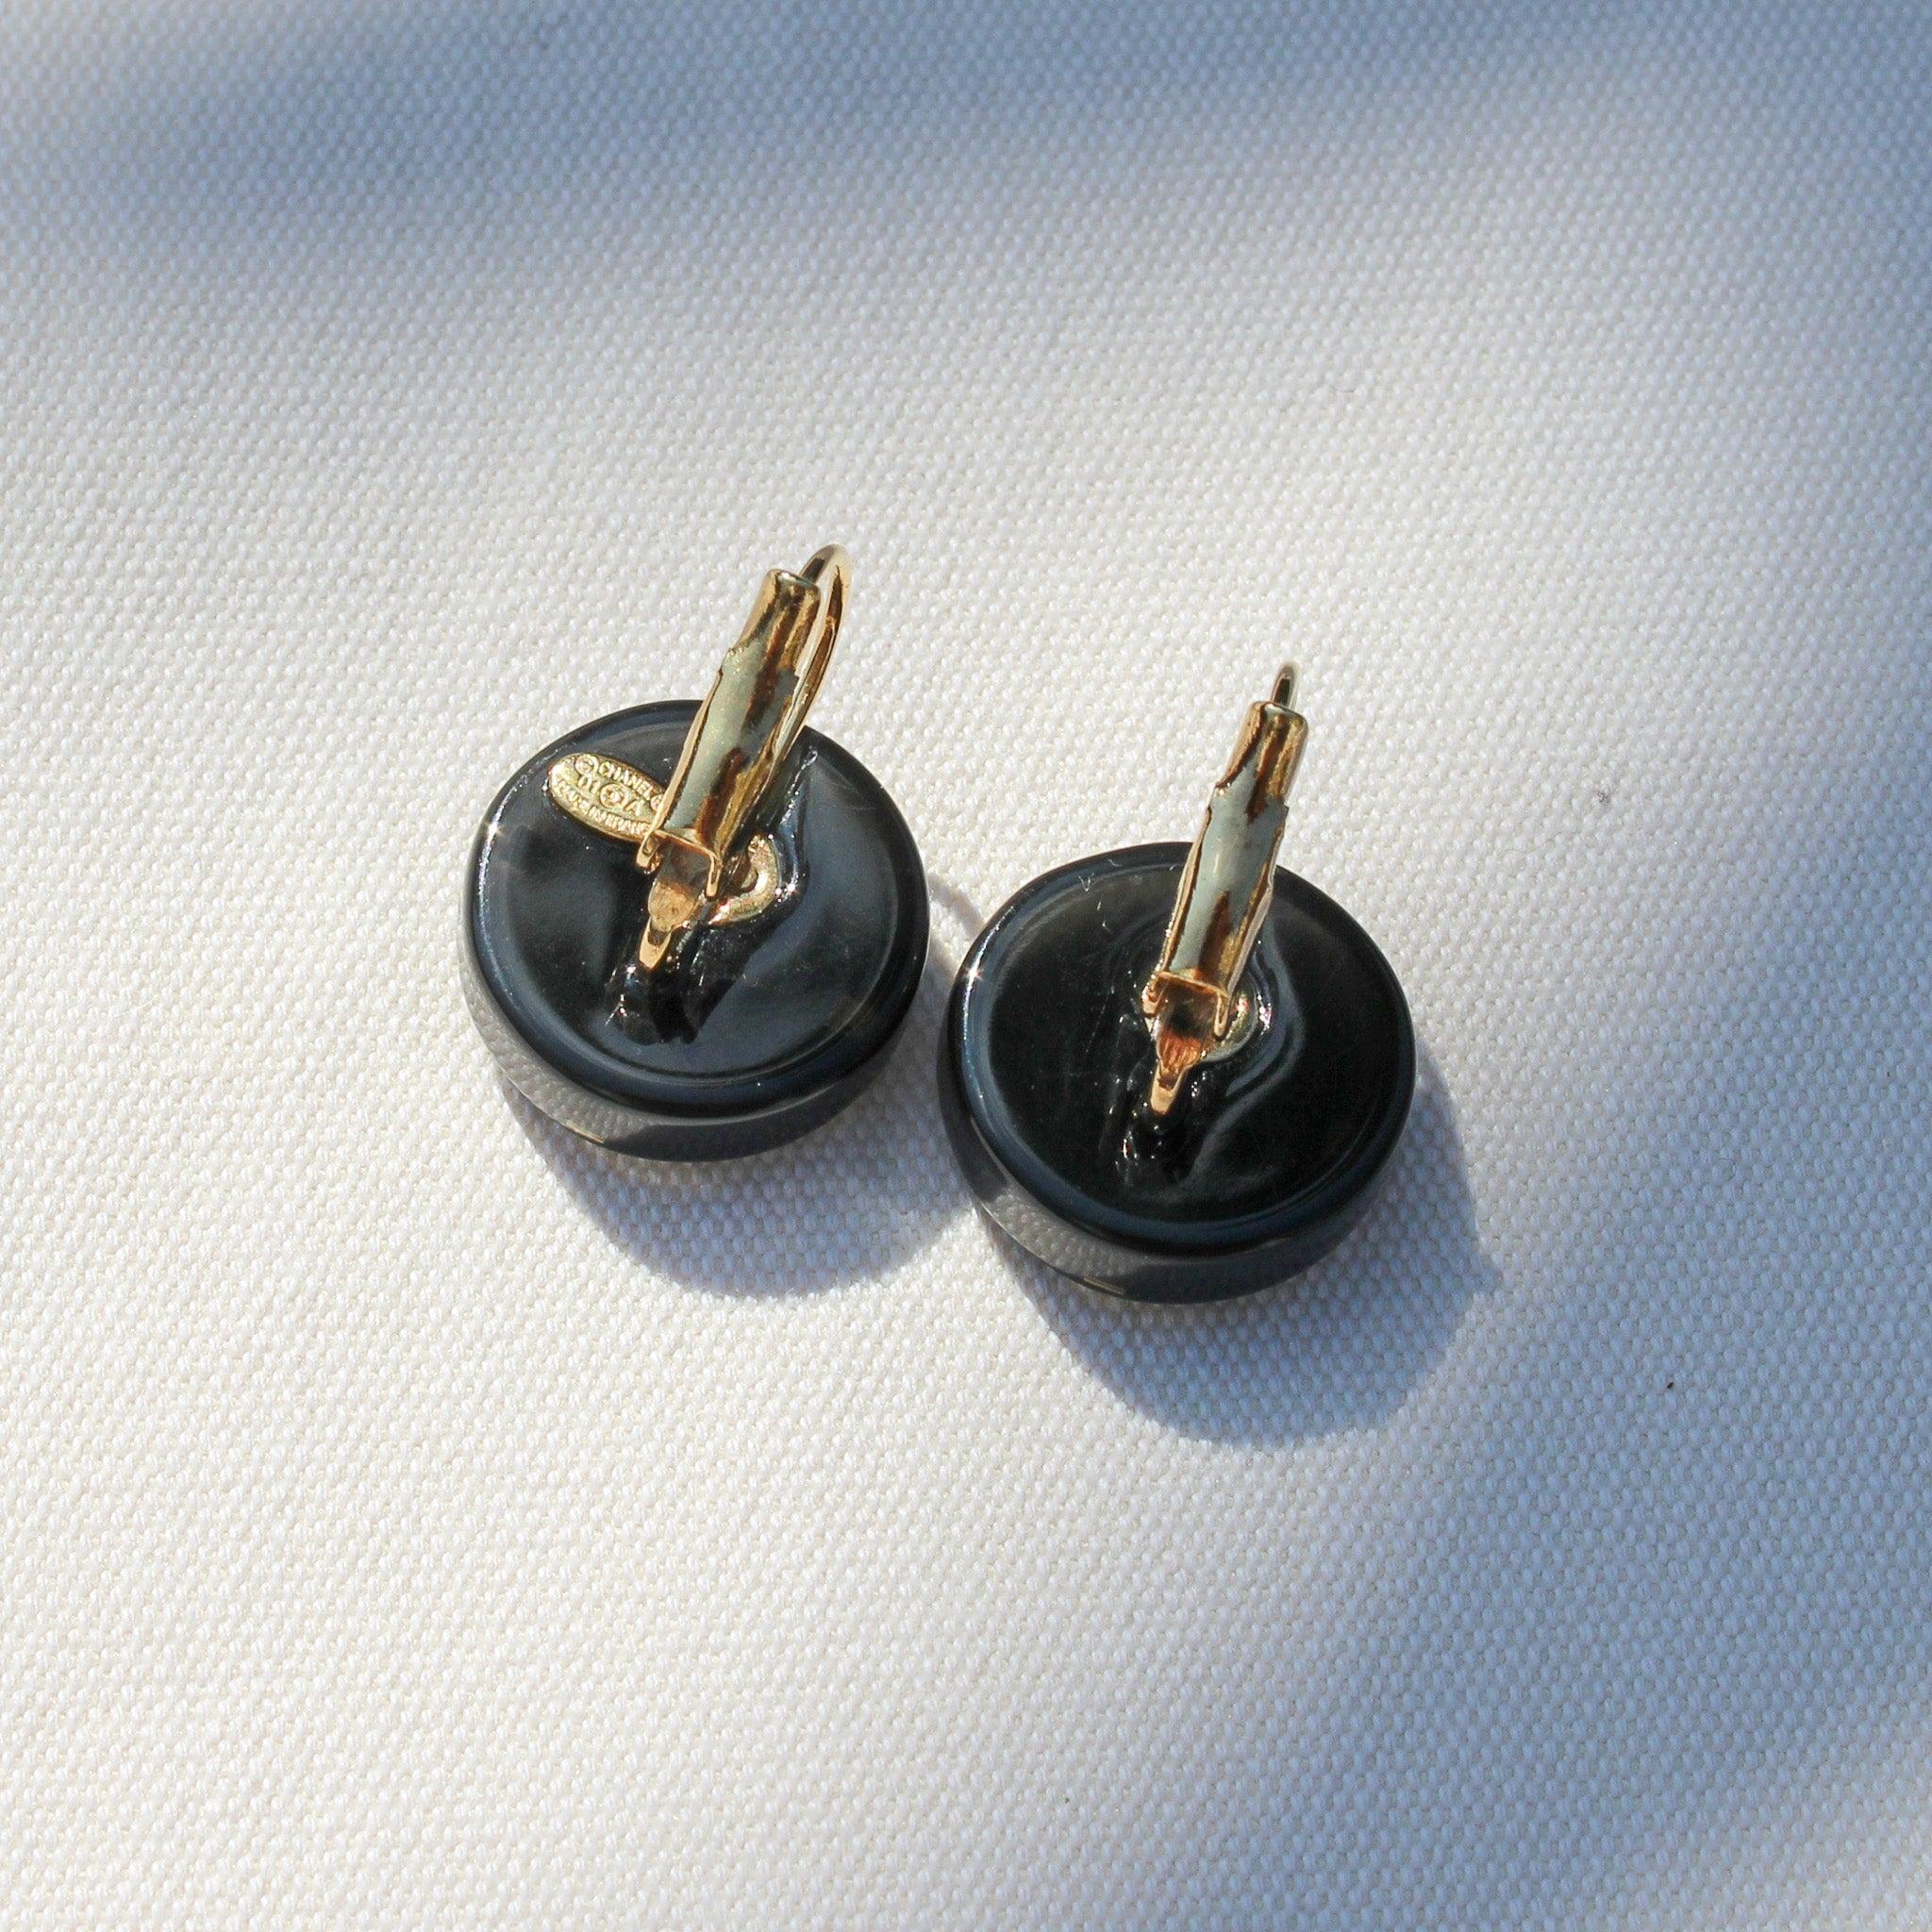 Vintage Y2K Chanel Earrings for Pierced Ears - 2001 Autumn Winter Collection 1